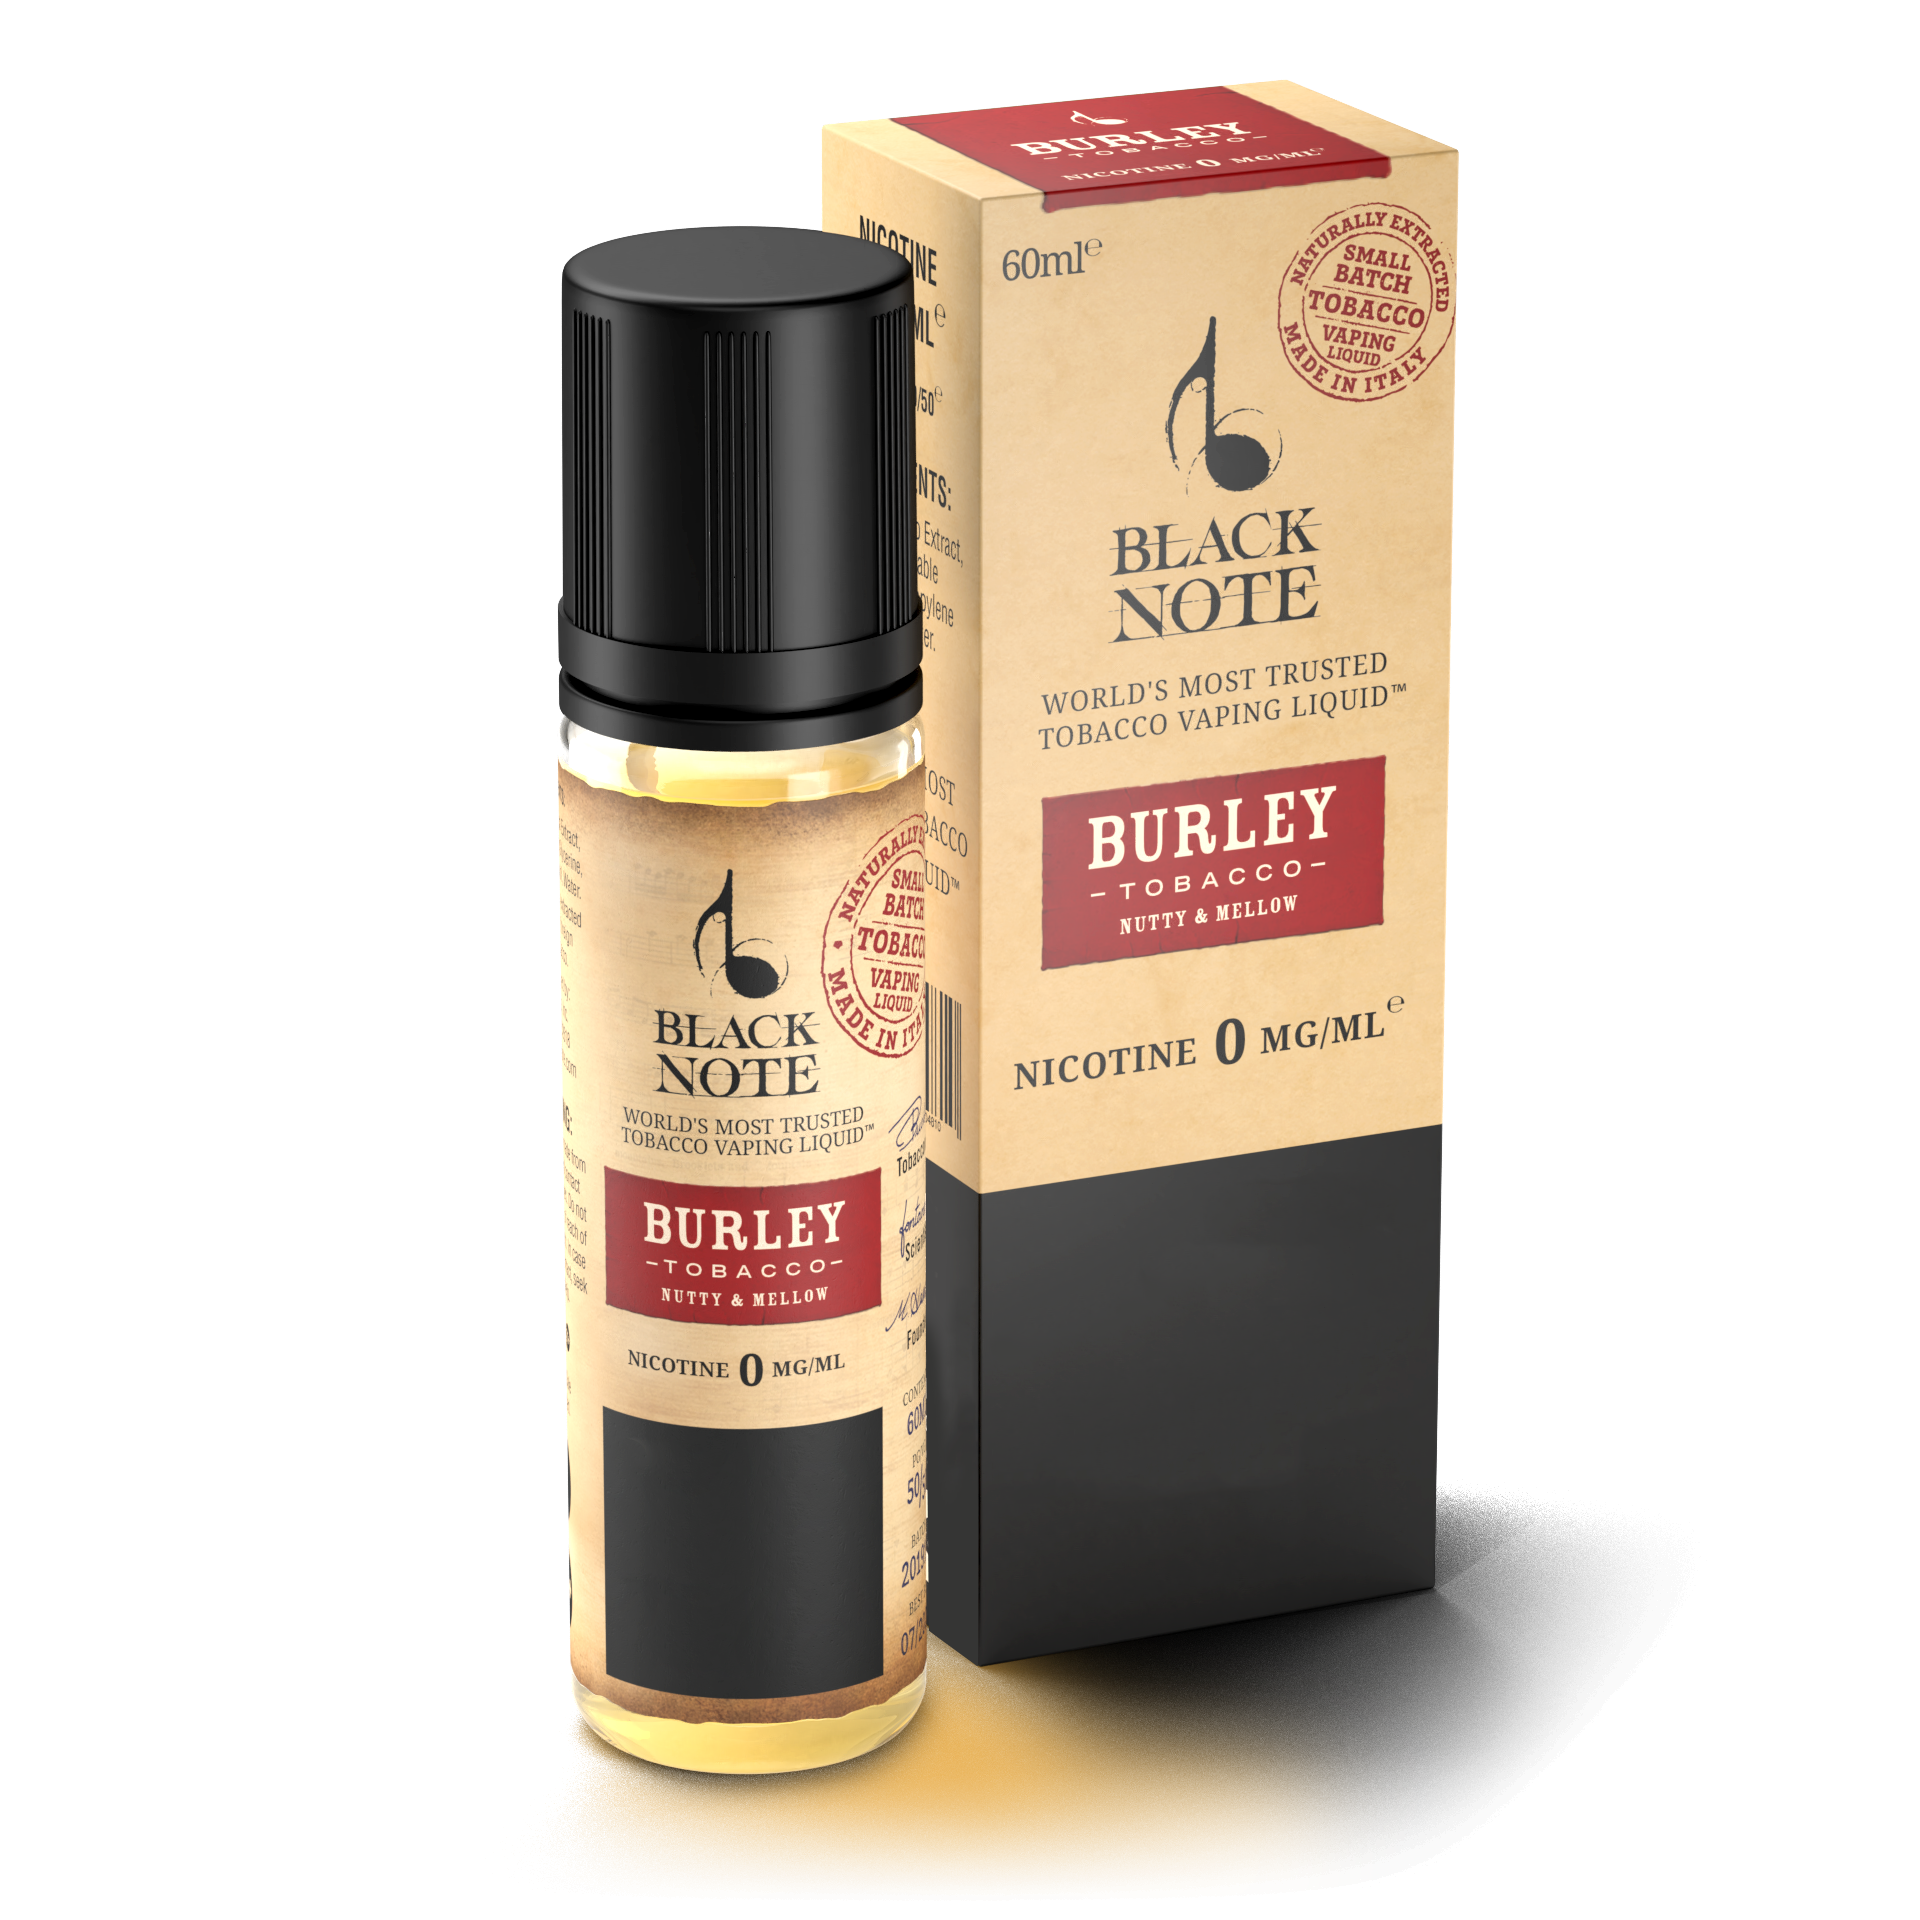 Buy Burley by Black Note - Wick And Wire Co Melbourne Vape Shop, Victoria Australia